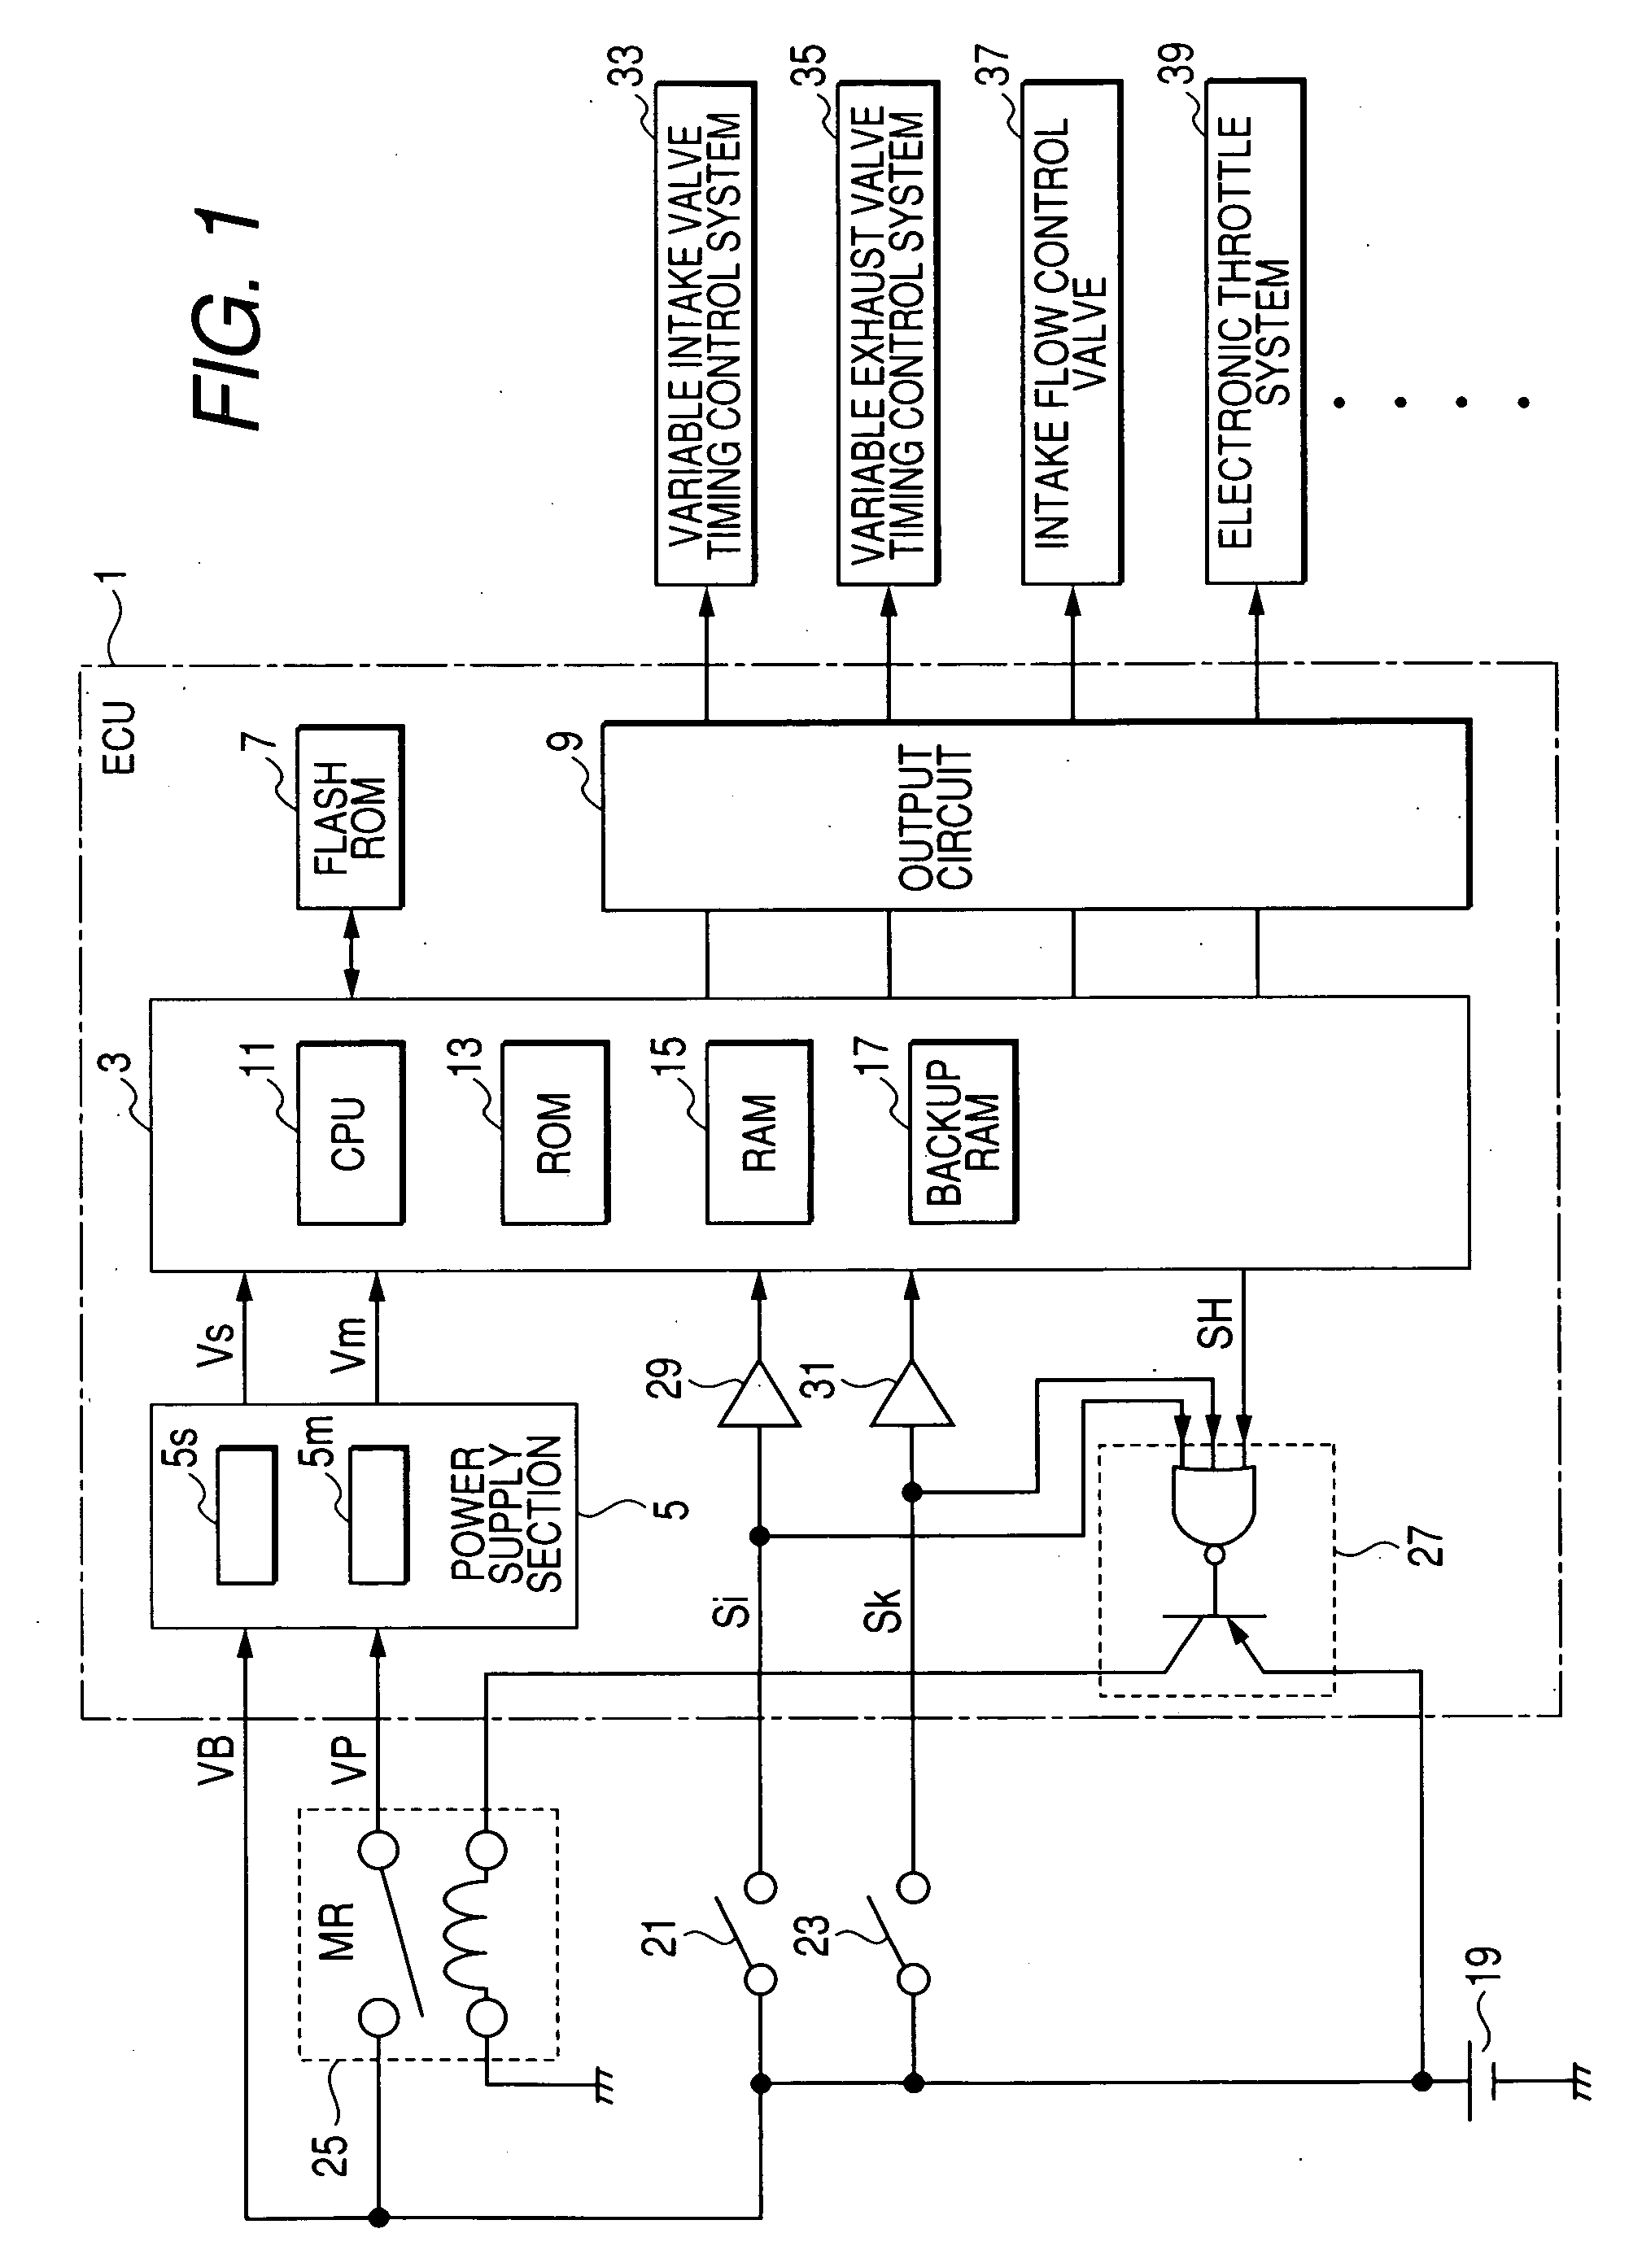 Electronic control apparatus which responds to shut-down command by executing specific processing prior to ceasing operation